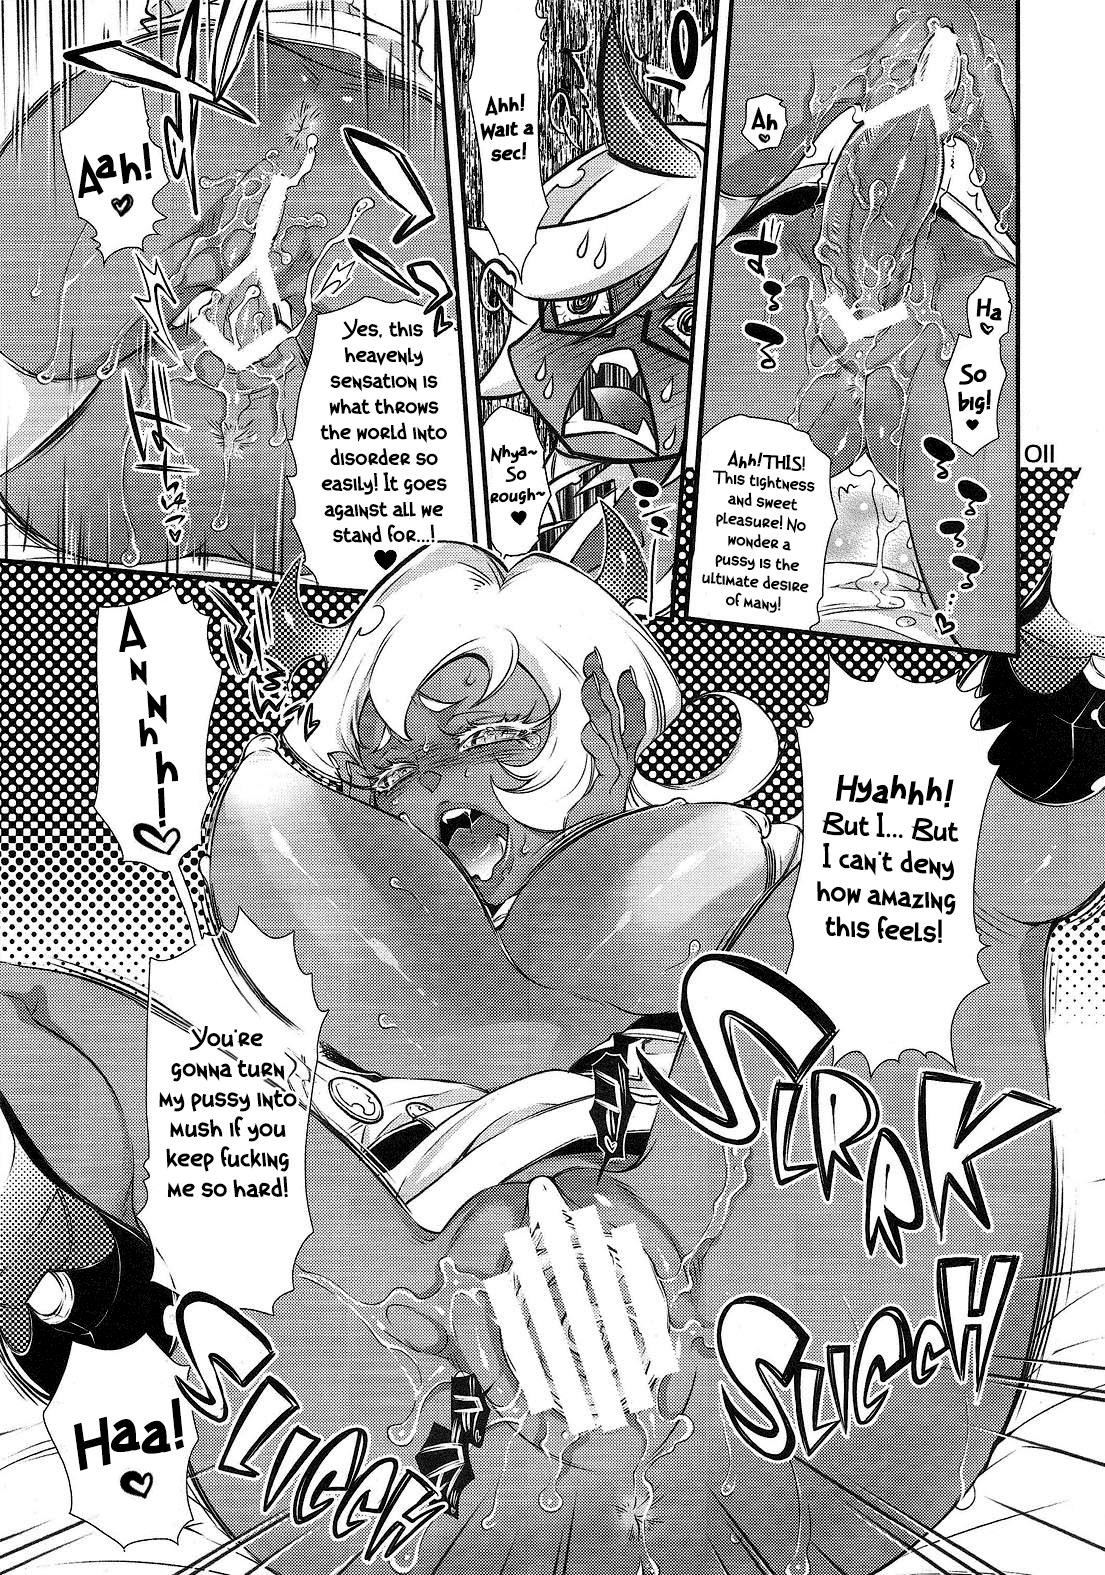 Erotic SPILL over - Panty and stocking with garterbelt Boobs - Page 10